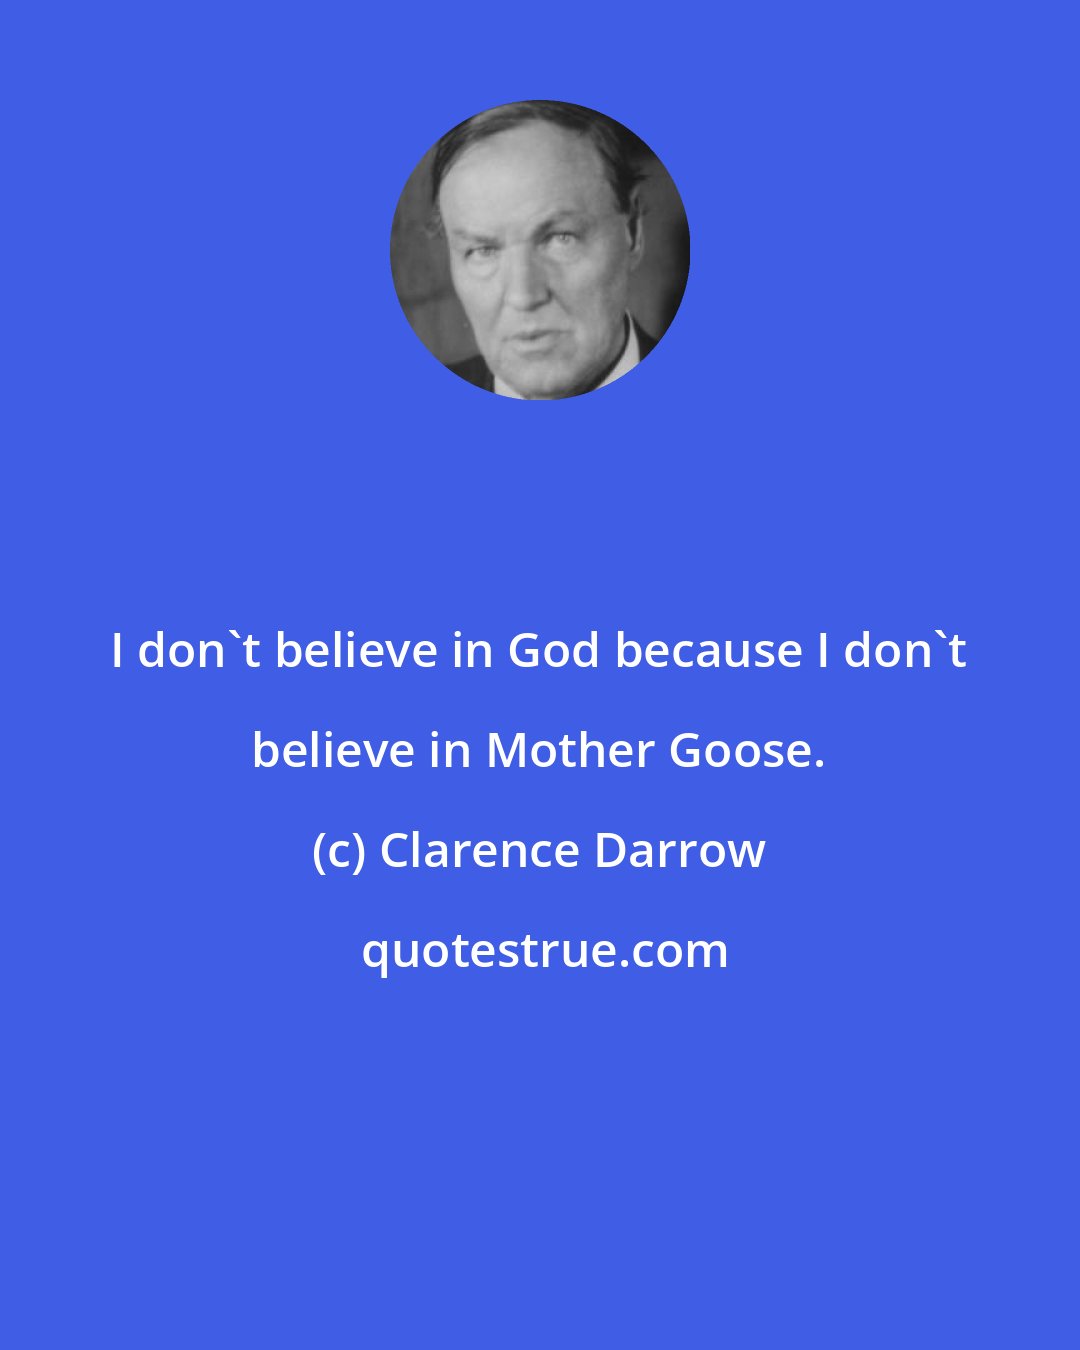 Clarence Darrow: I don't believe in God because I don't believe in Mother Goose.